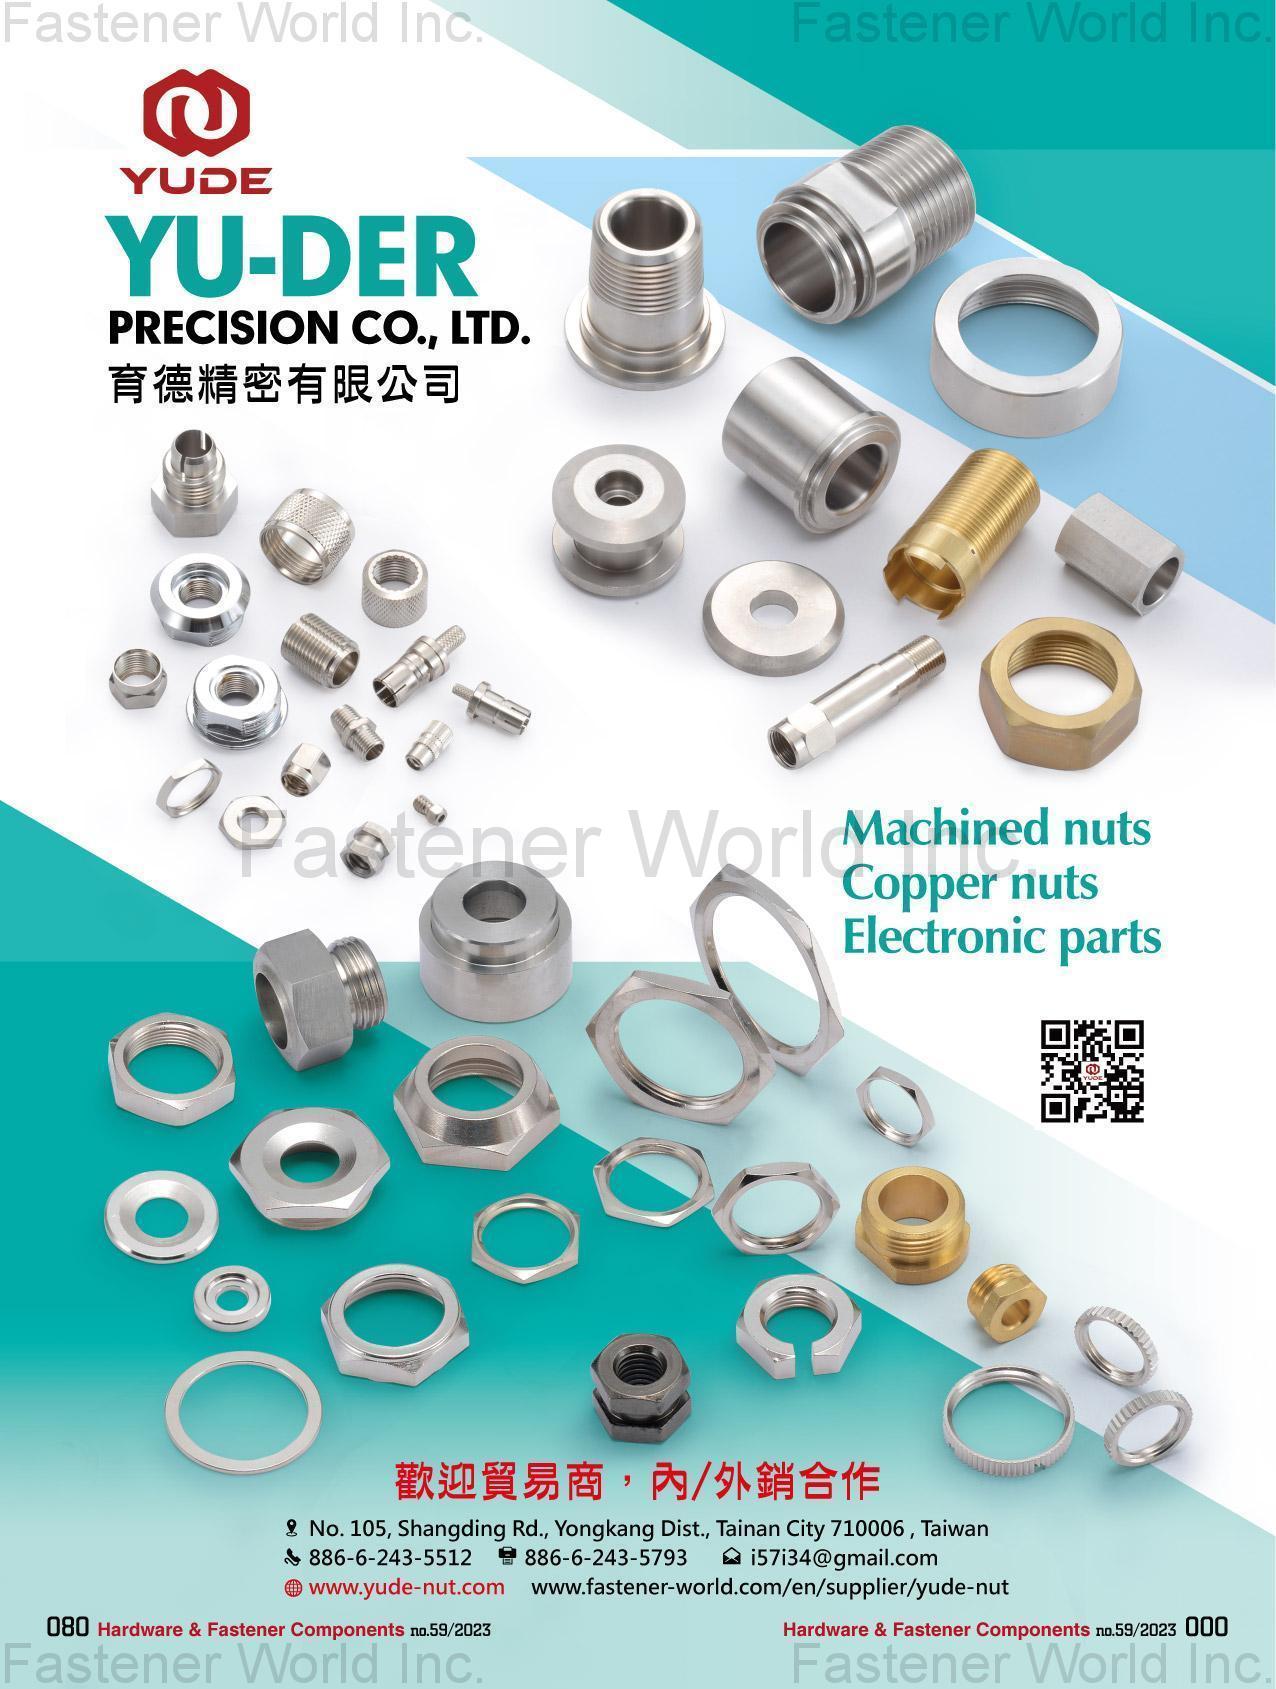 YU-DER PRECISION CO., LTD. , Machined Nuts, Copper Nuts, Electronic Parts